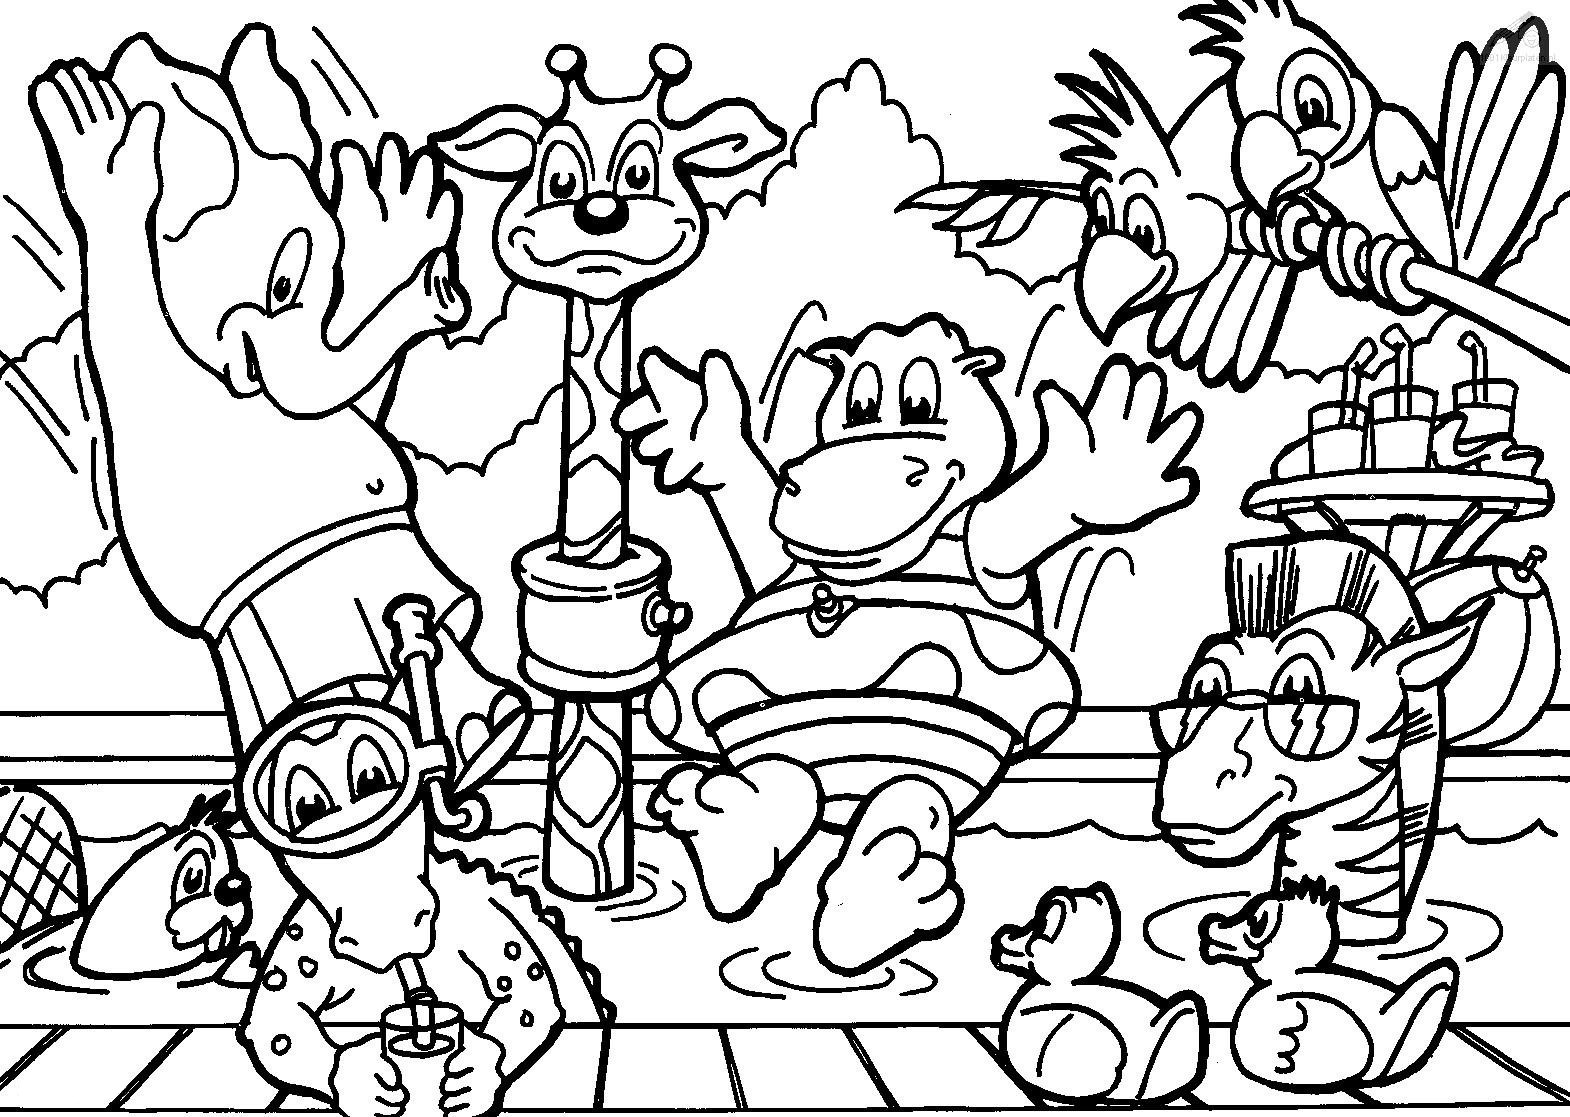 Animal Coloring Pages For Kids
 Wild Animal Coloring Pages Best Coloring Pages For Kids